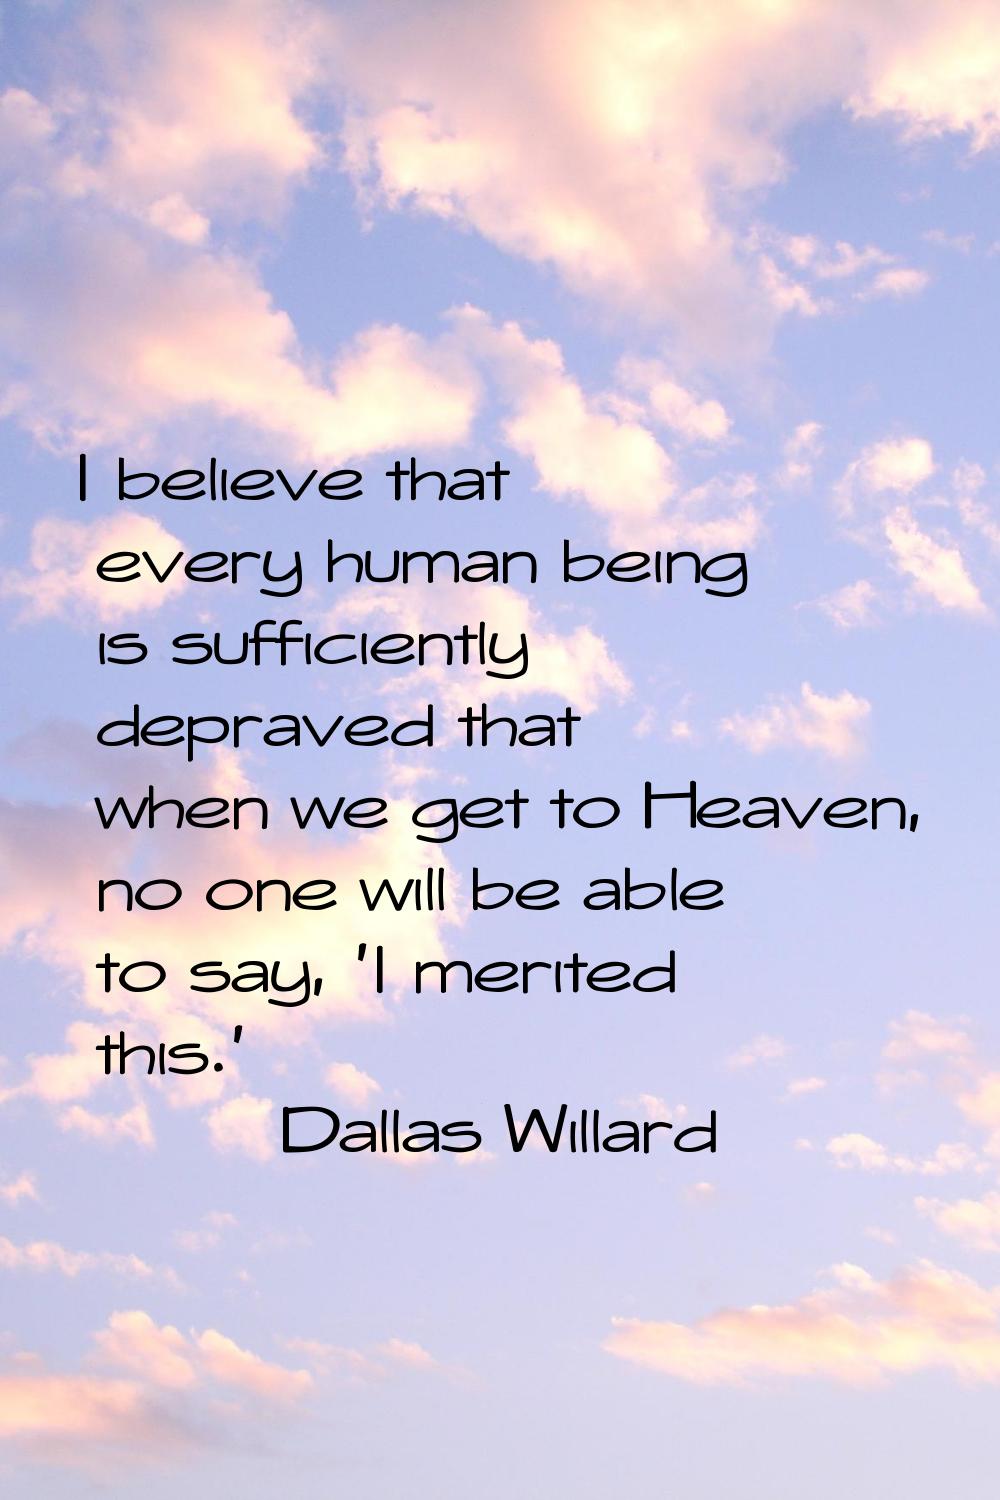 I believe that every human being is sufficiently depraved that when we get to Heaven, no one will b